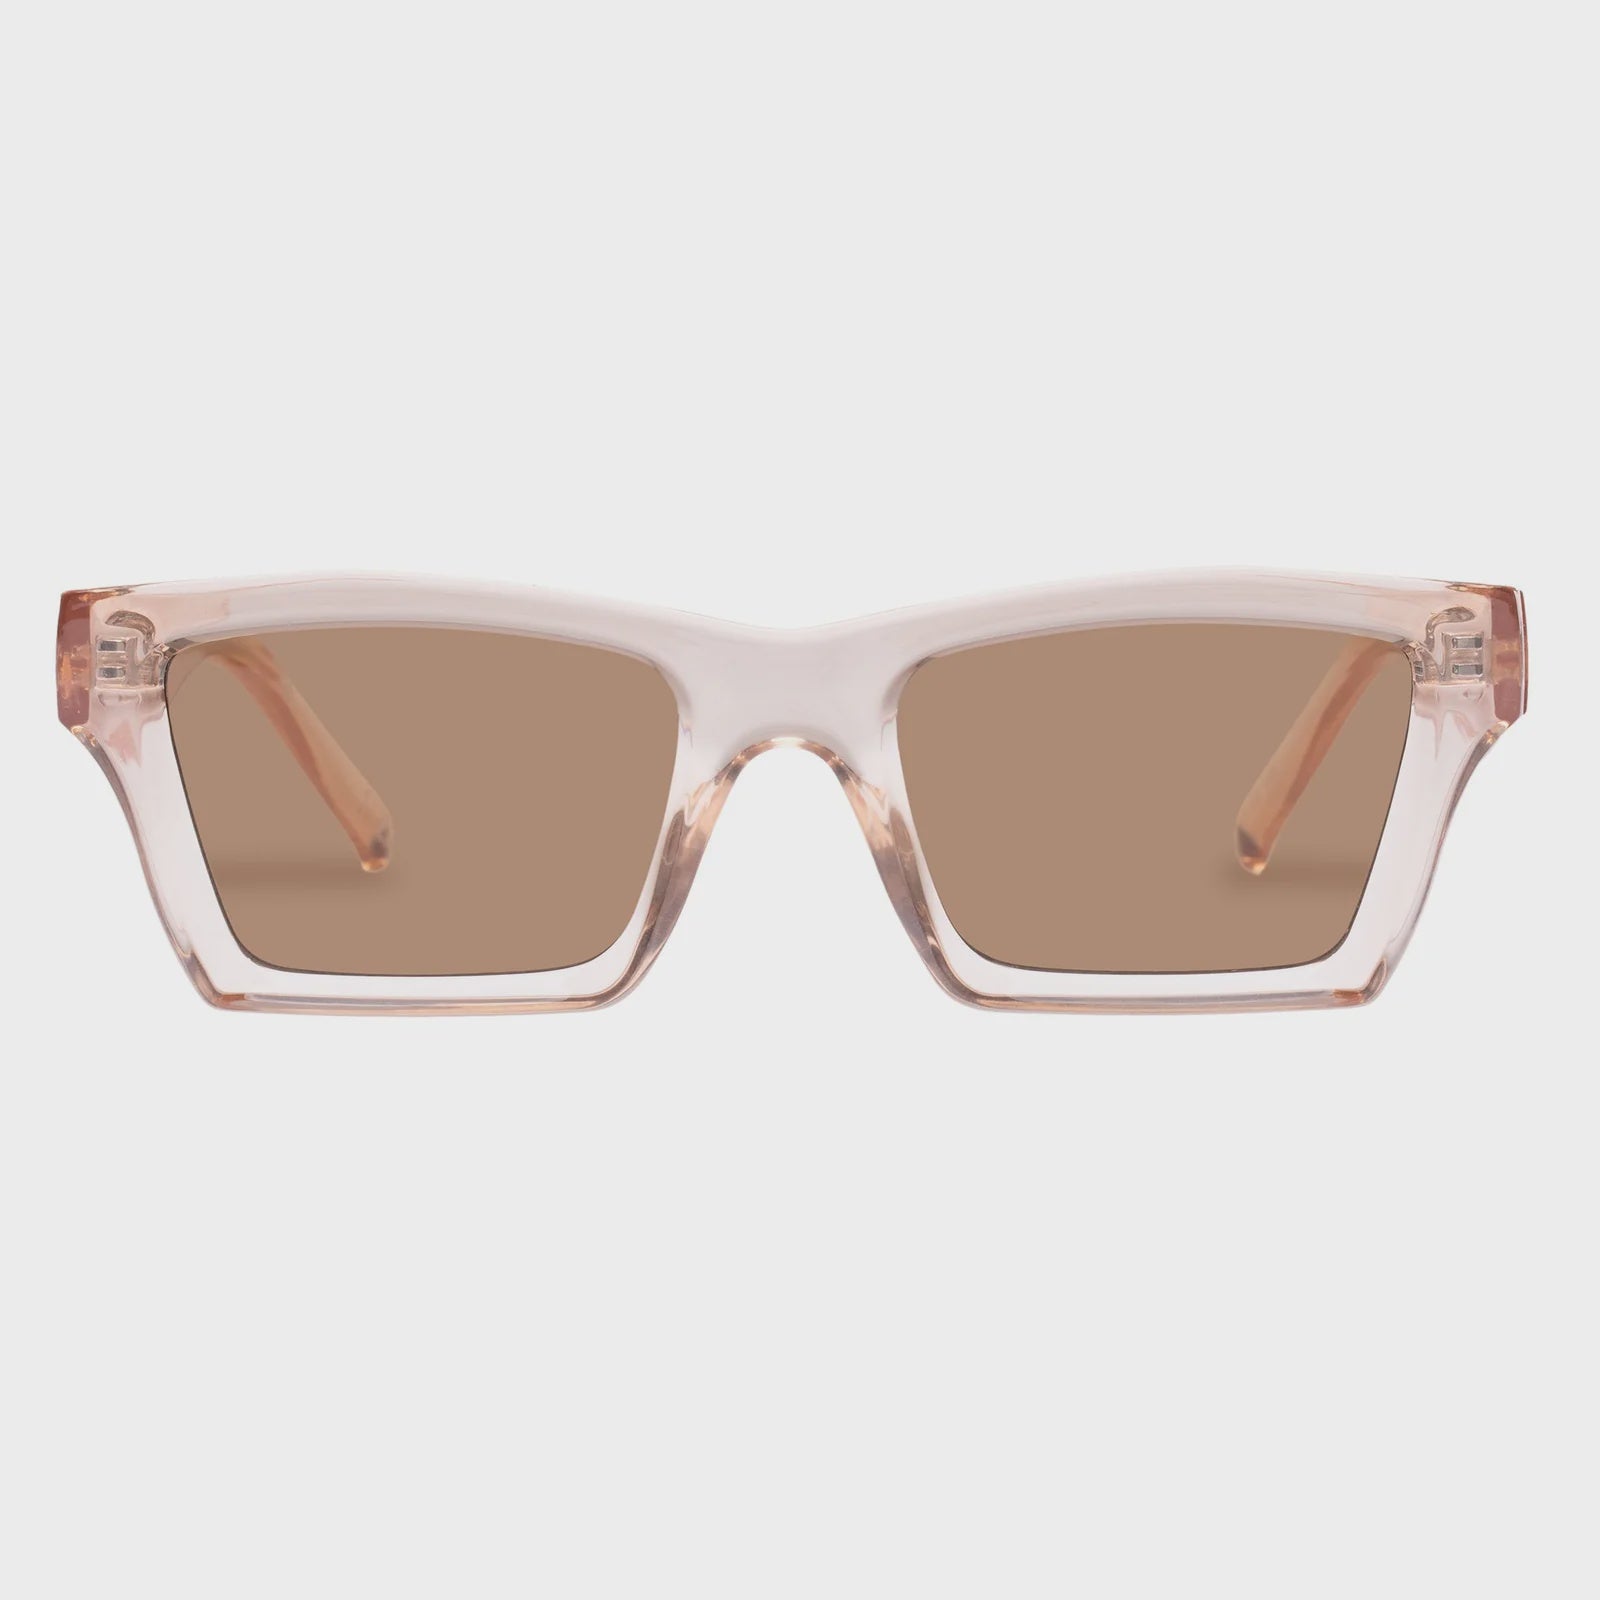 LE SPECS - SOMETHING SUNGLASSES IN PINK CHAMPAGNE